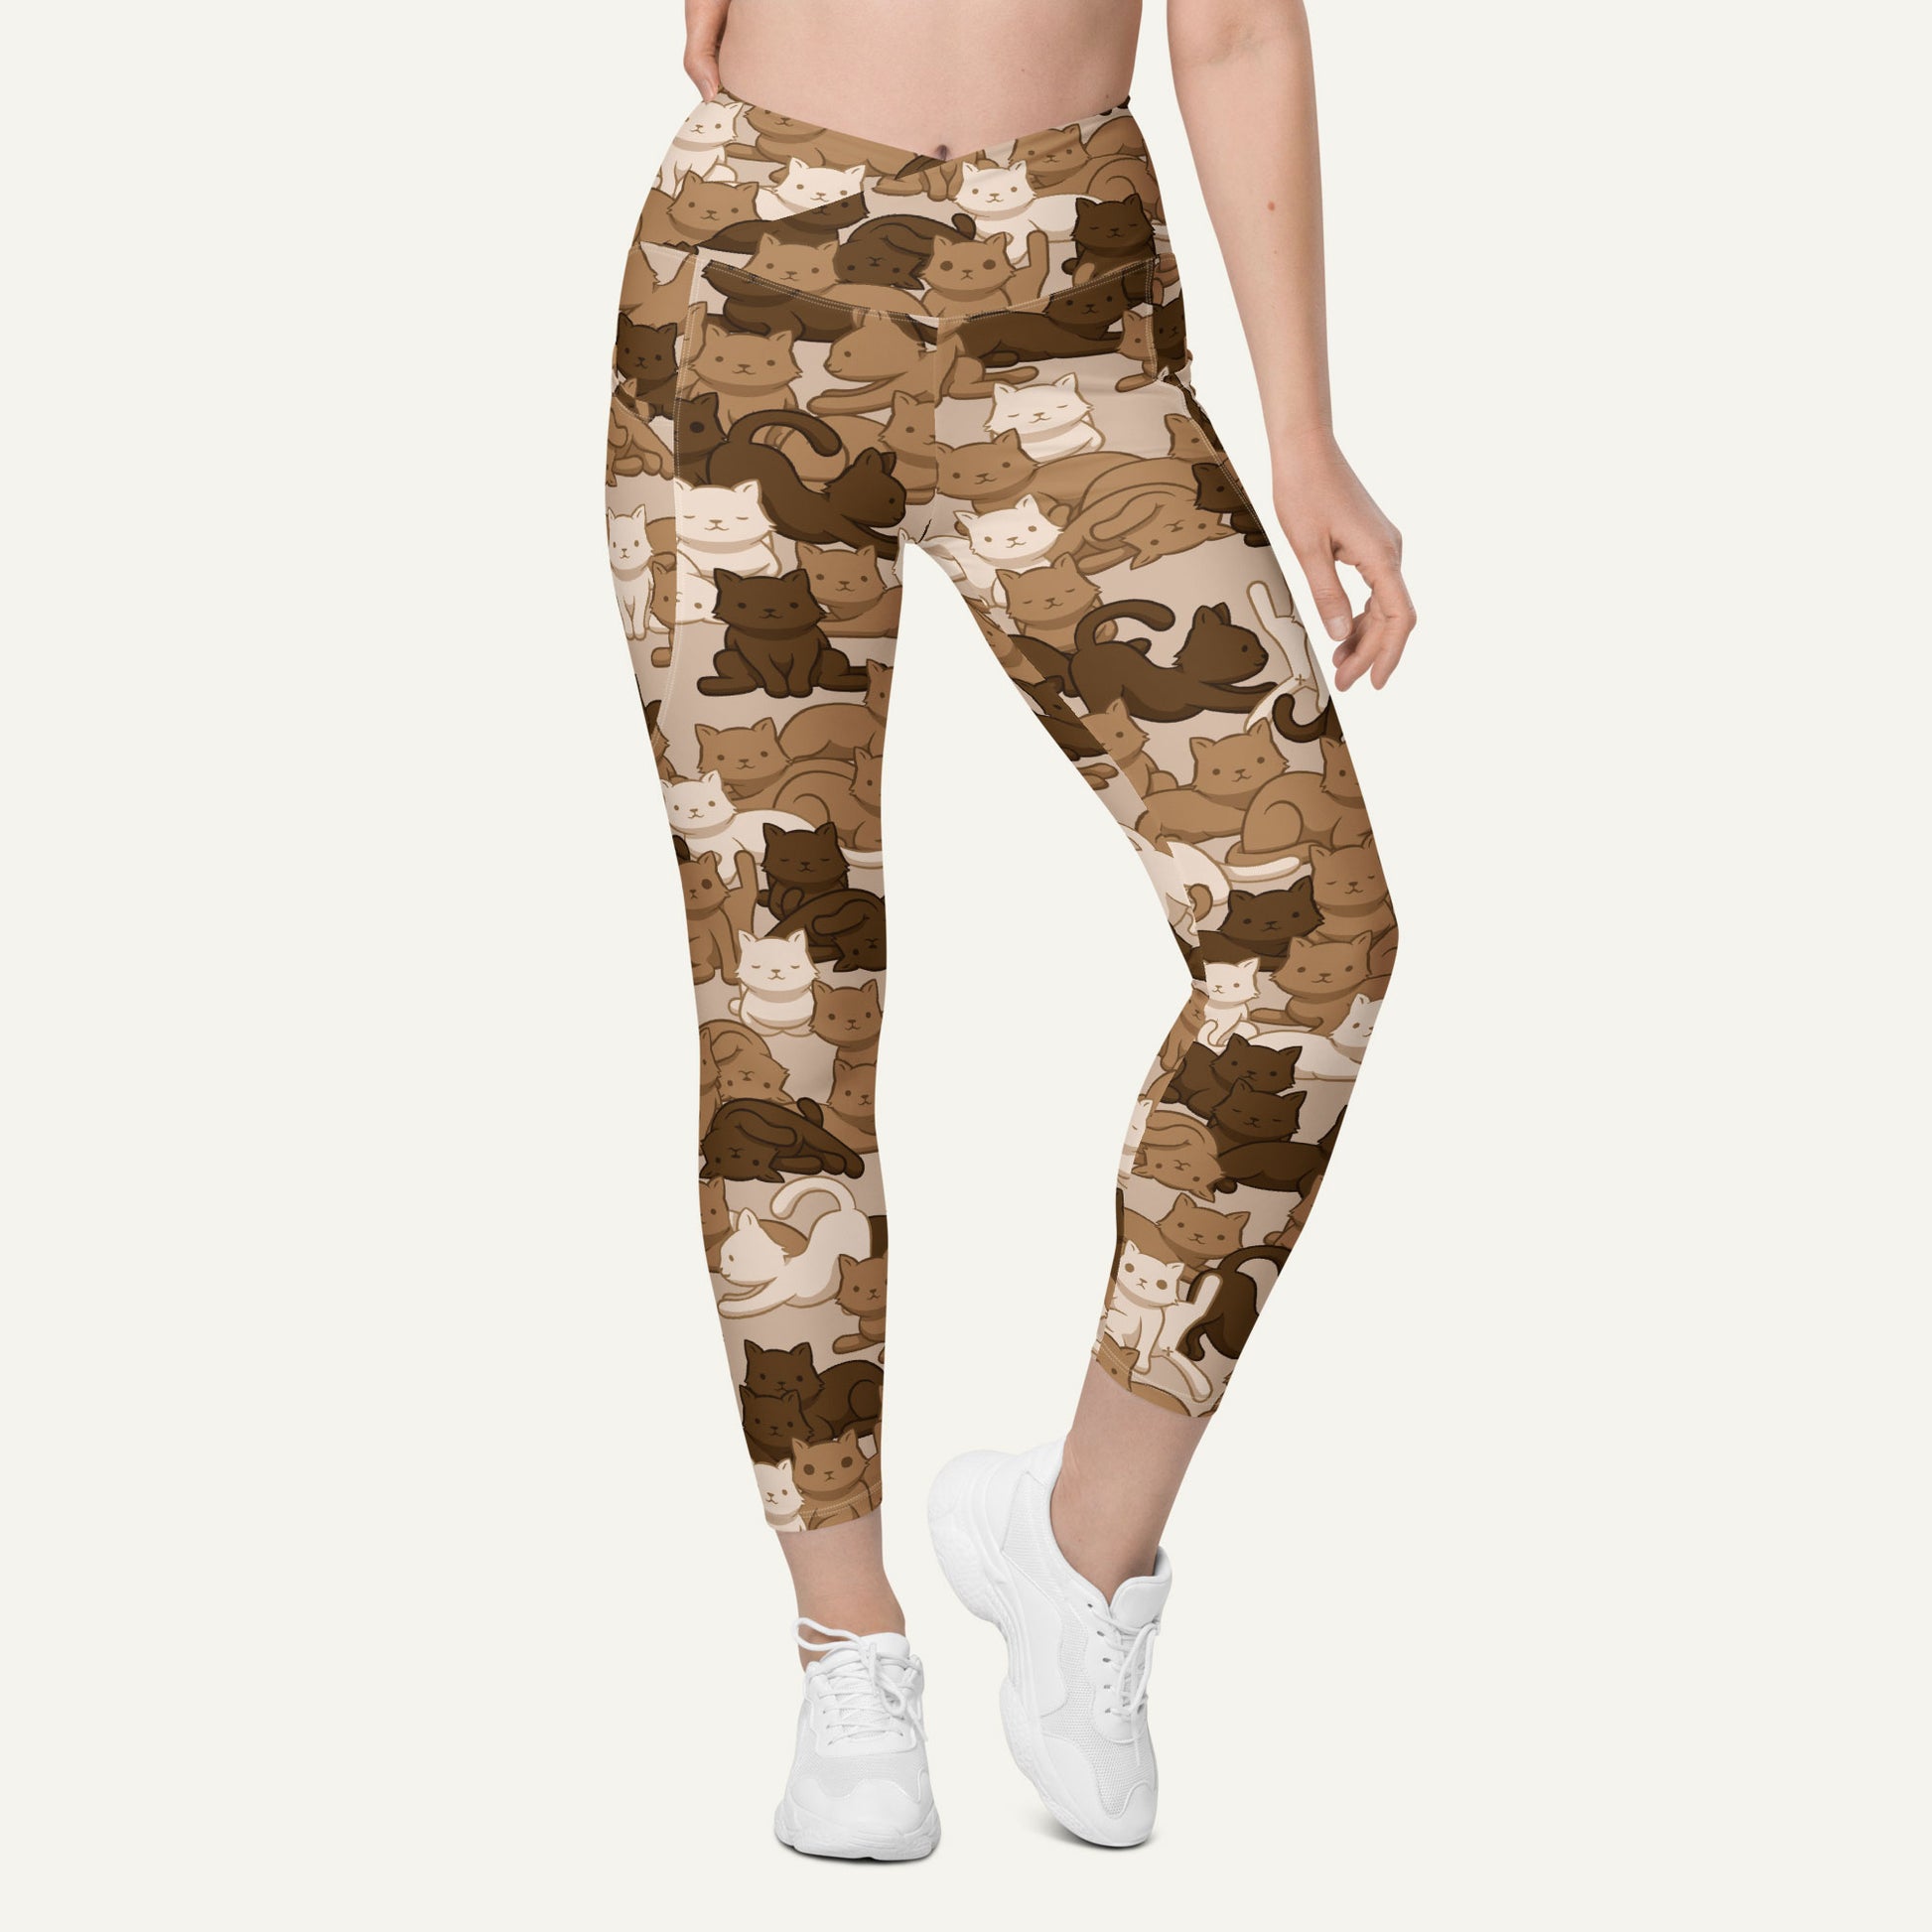 Cats Camouflage Desert High-Waisted Crossover Leggings With